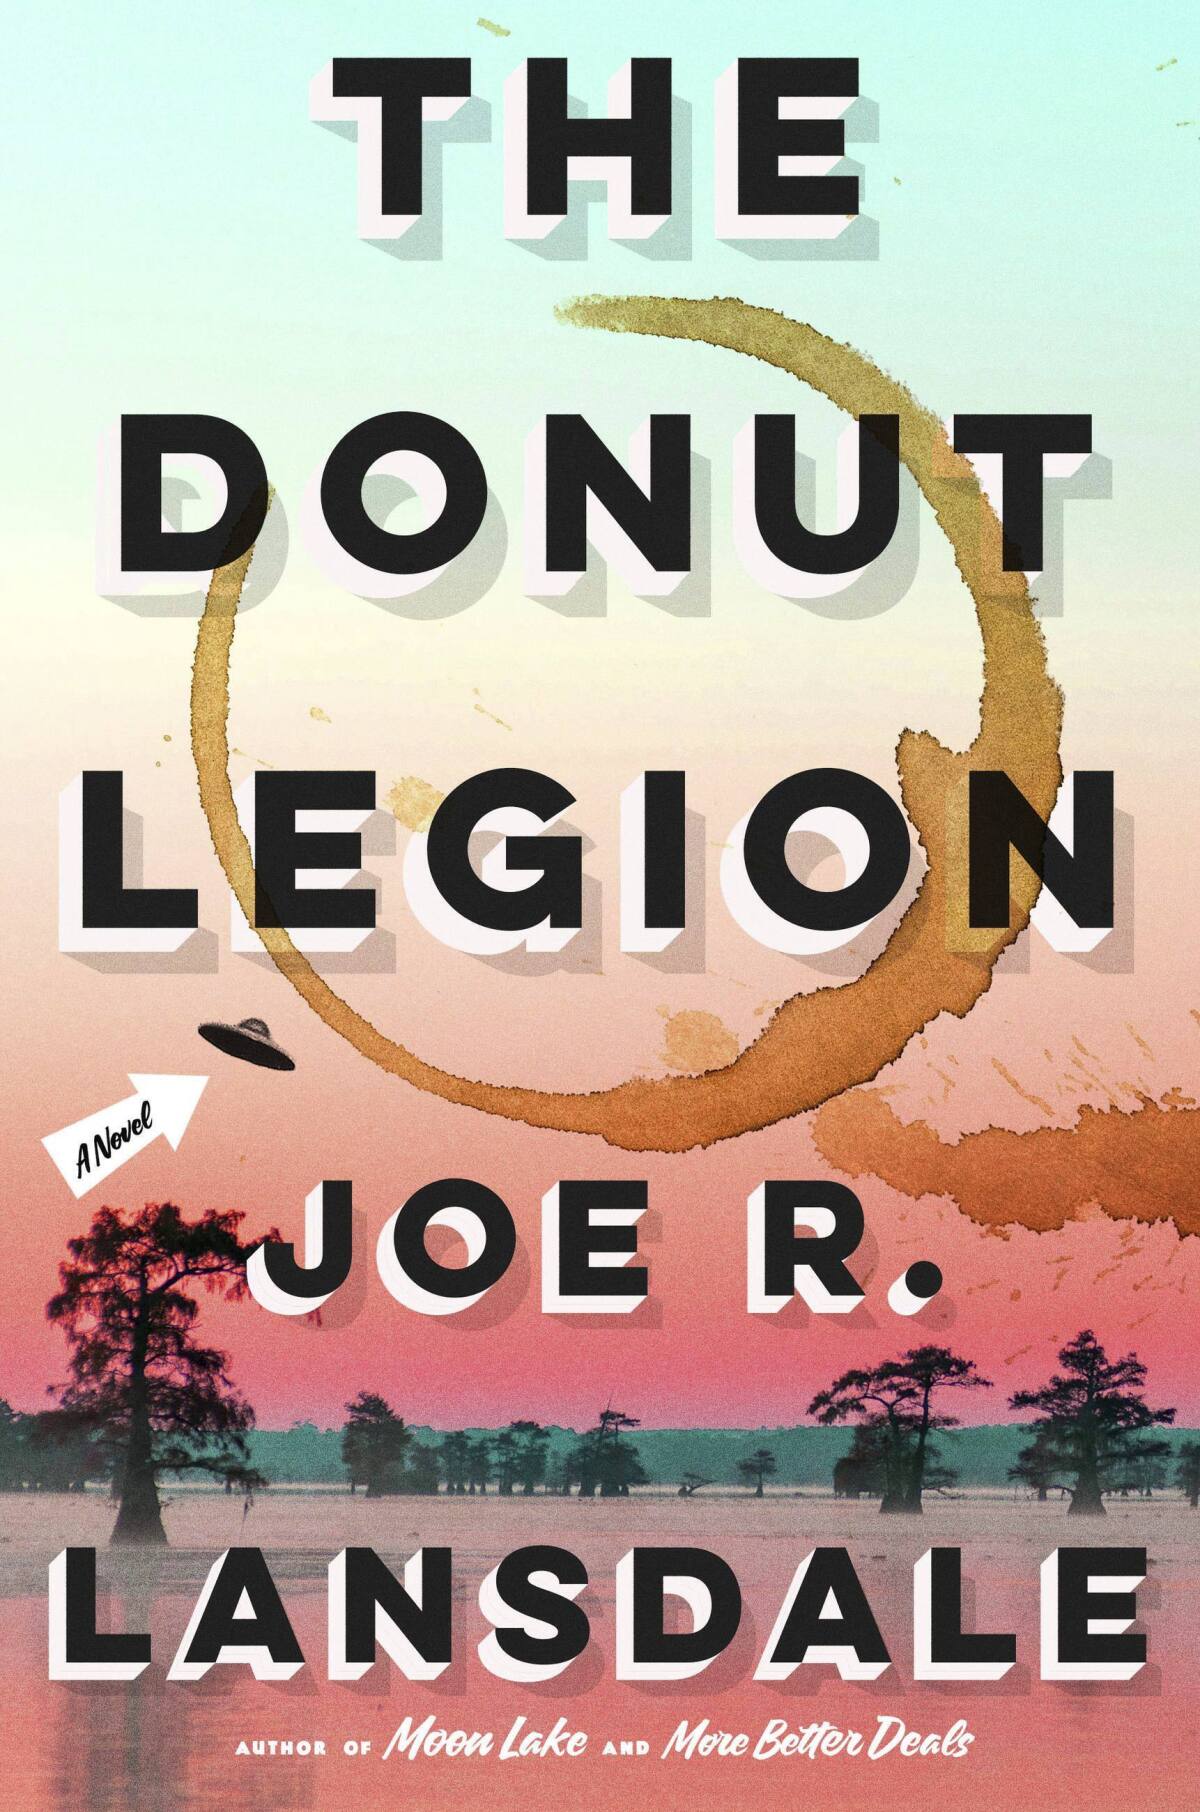 This cover image released by Mulholland Books shows "The Donut Legion" by Joe R. Lansdale. (Mulholland Books via AP)